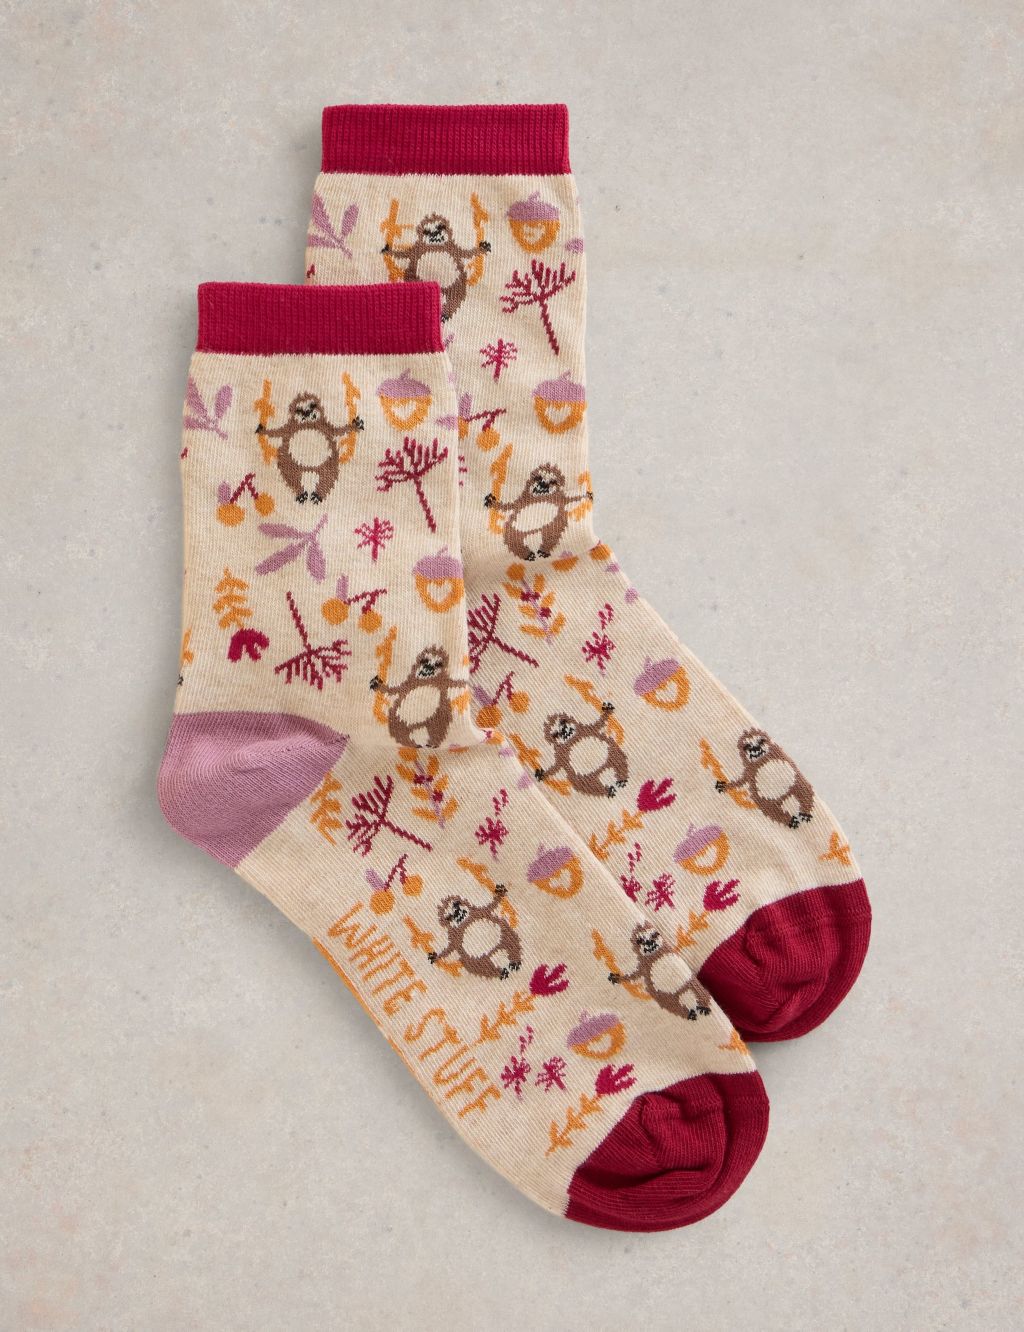 Cotton Rich Sloth Ankle High Socks